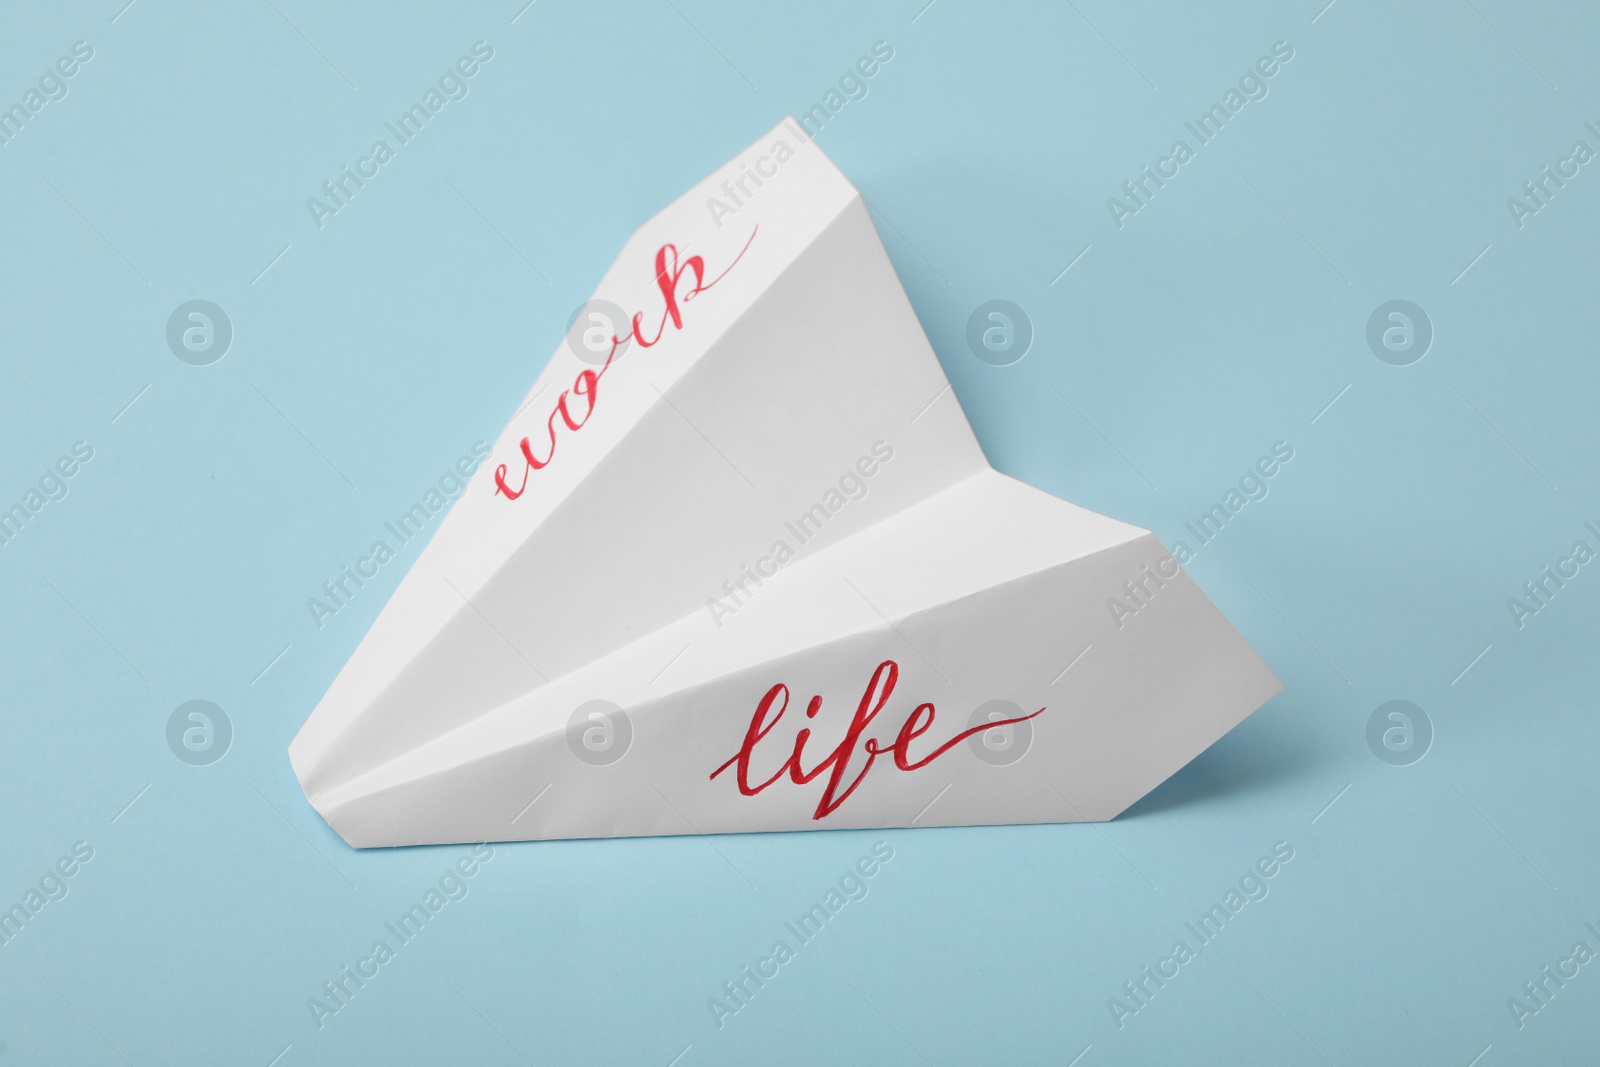 Photo of Paper plane with words Work and Life on light blue background. Balance concept